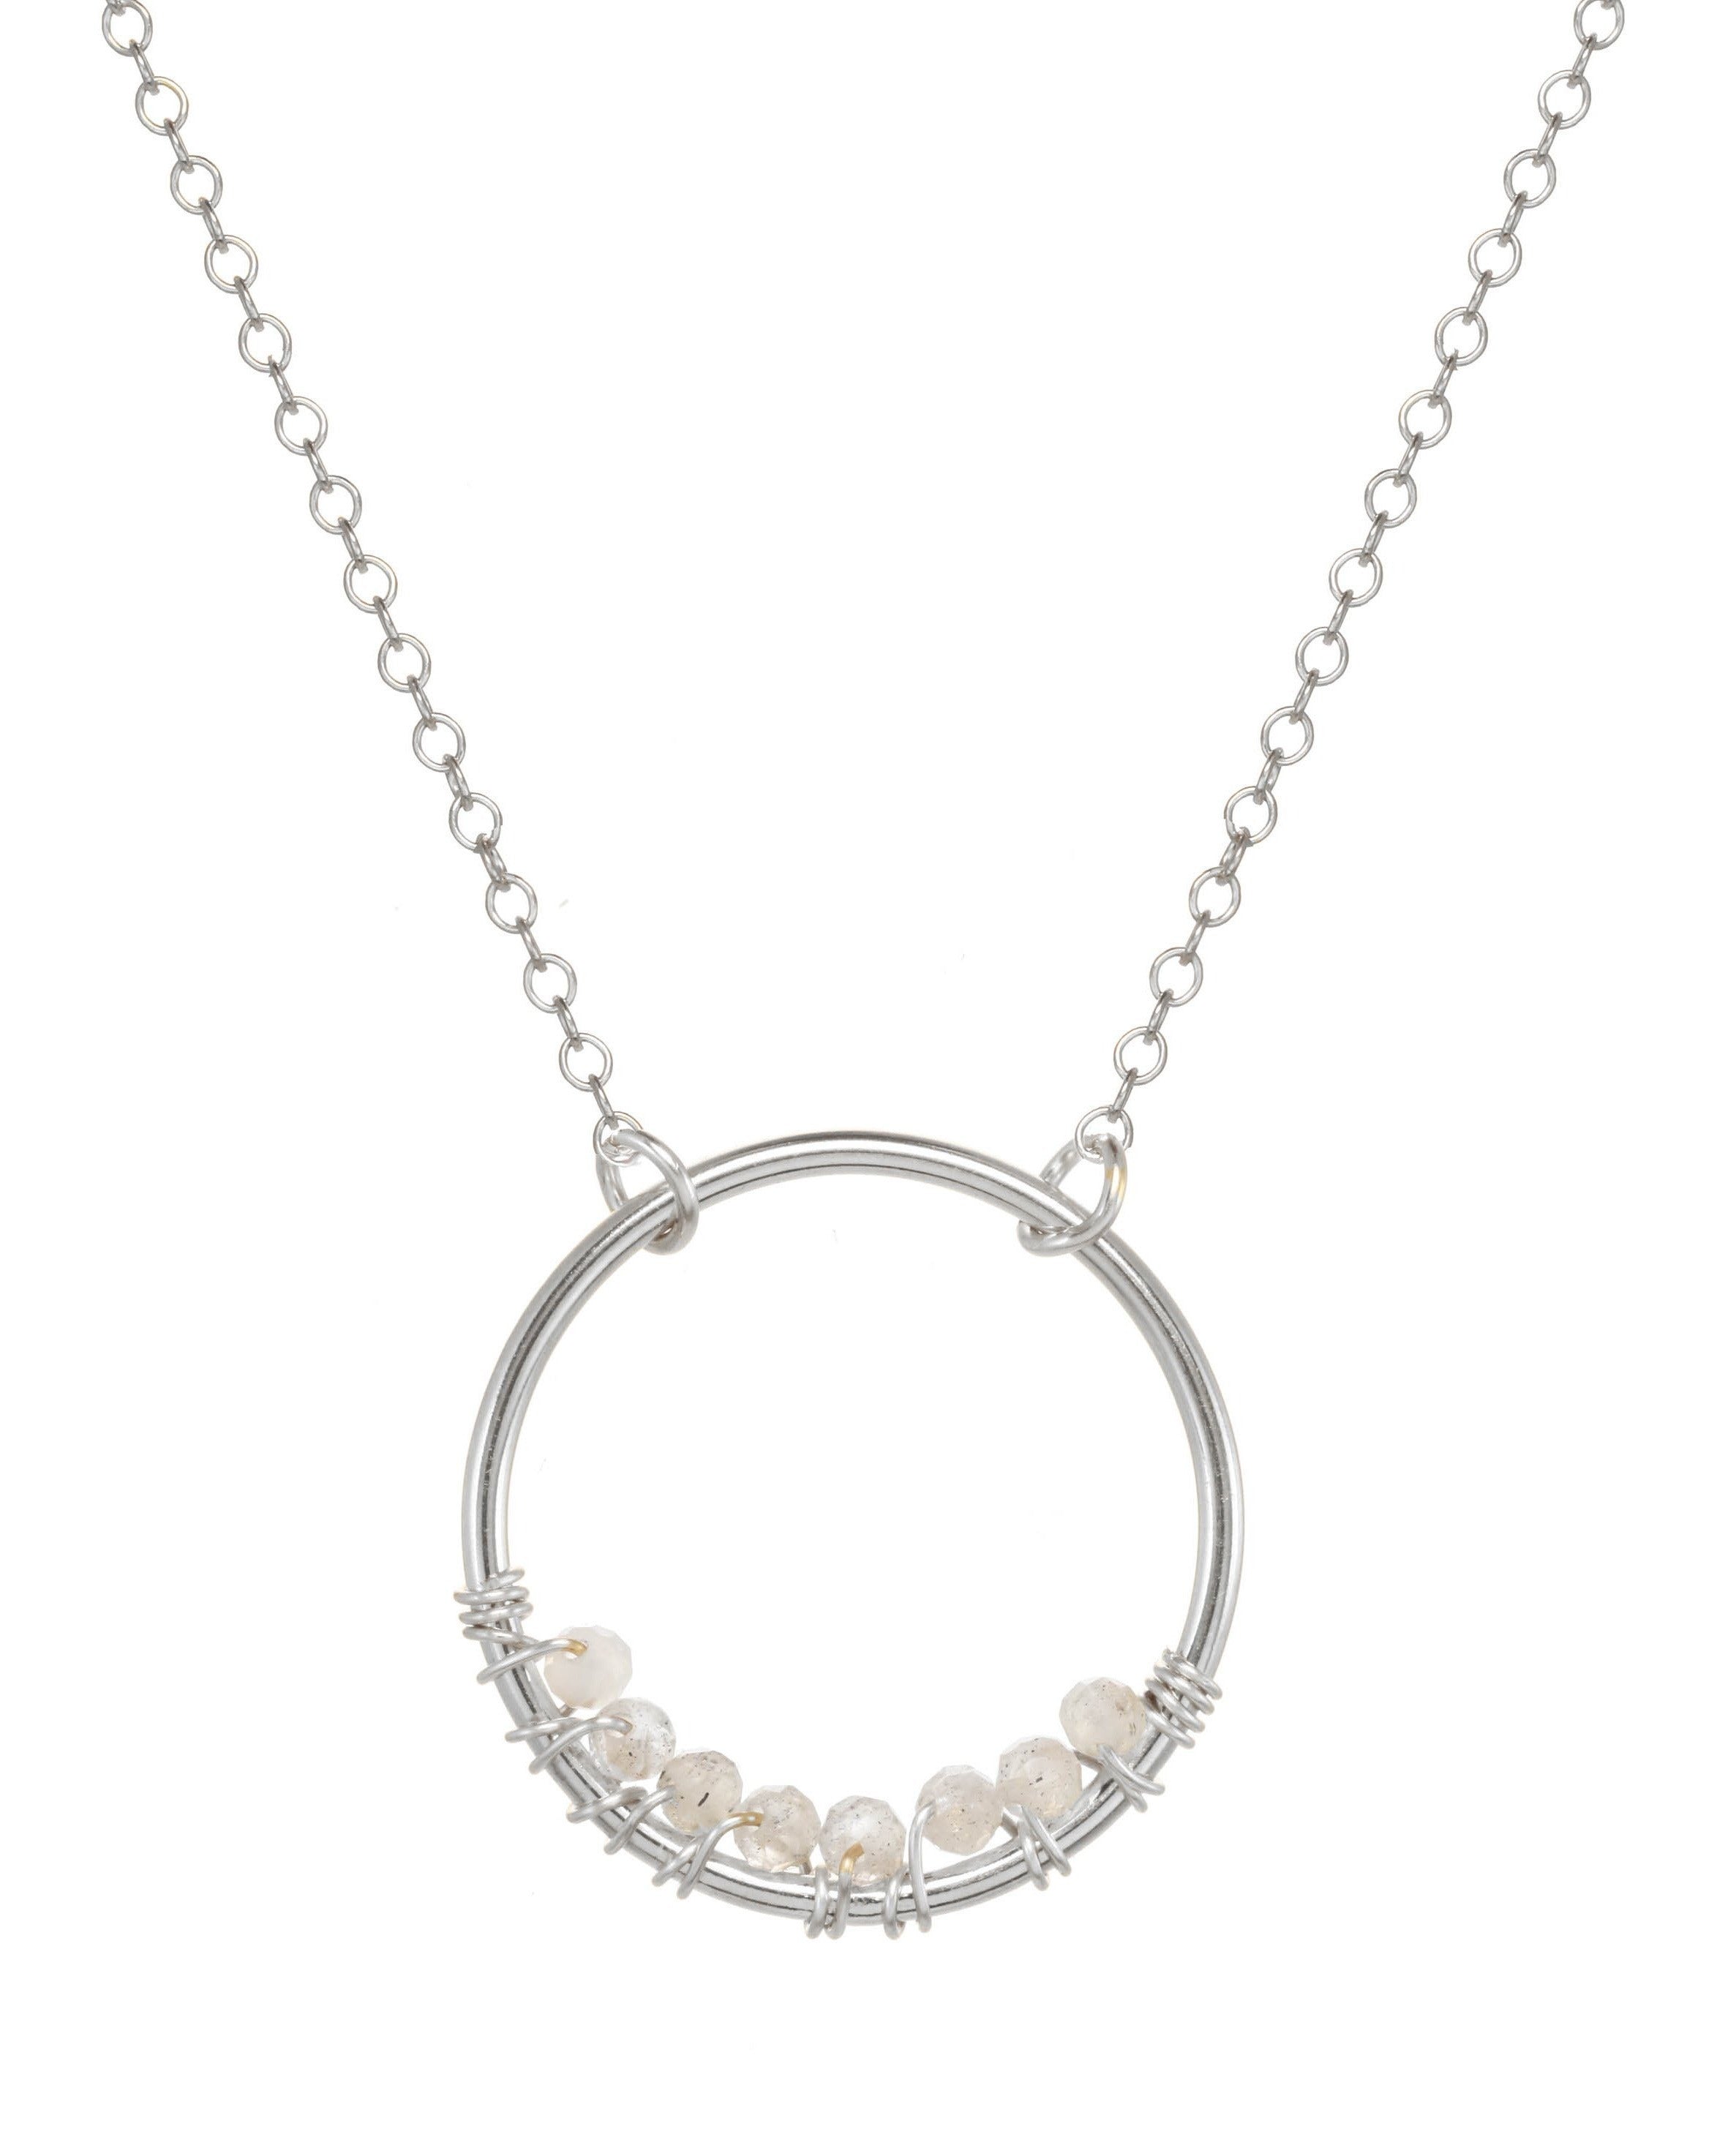 Curra Necklace by KOZAKH. A 16 to 18 inch adjustable length necklace in 14K Gold Filled, featuring a ring with 2mm faceted round Moonstone gems.